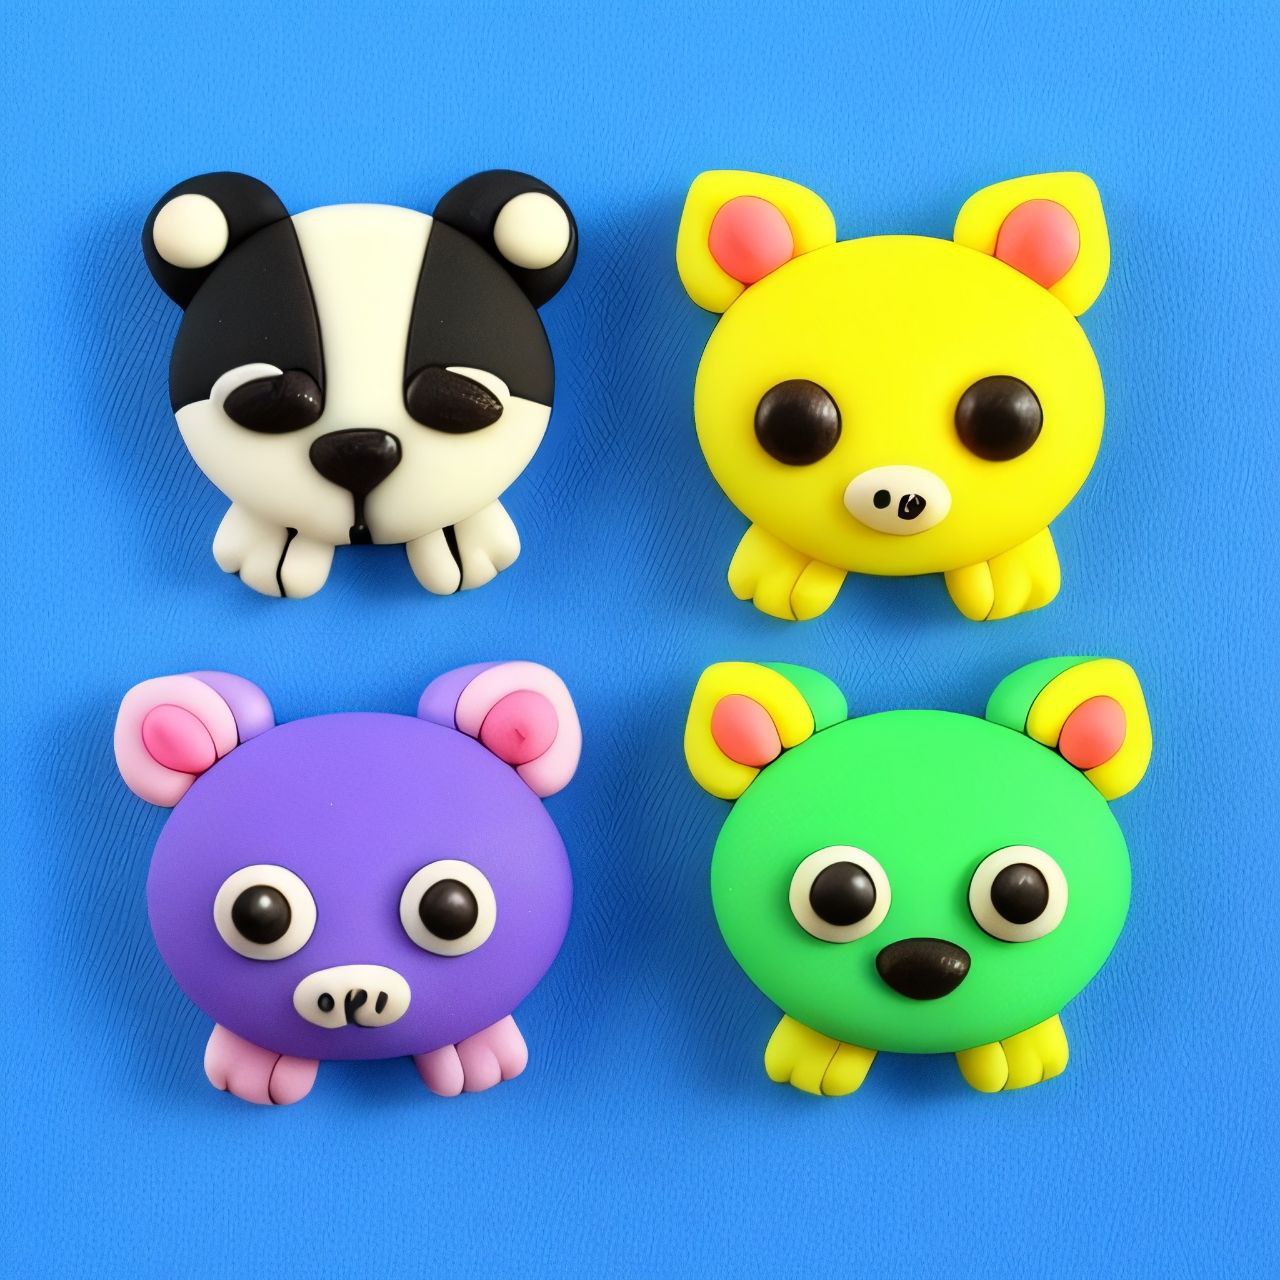 5 Easy Polymer Clay Projects for Kids to Make During School Holidays